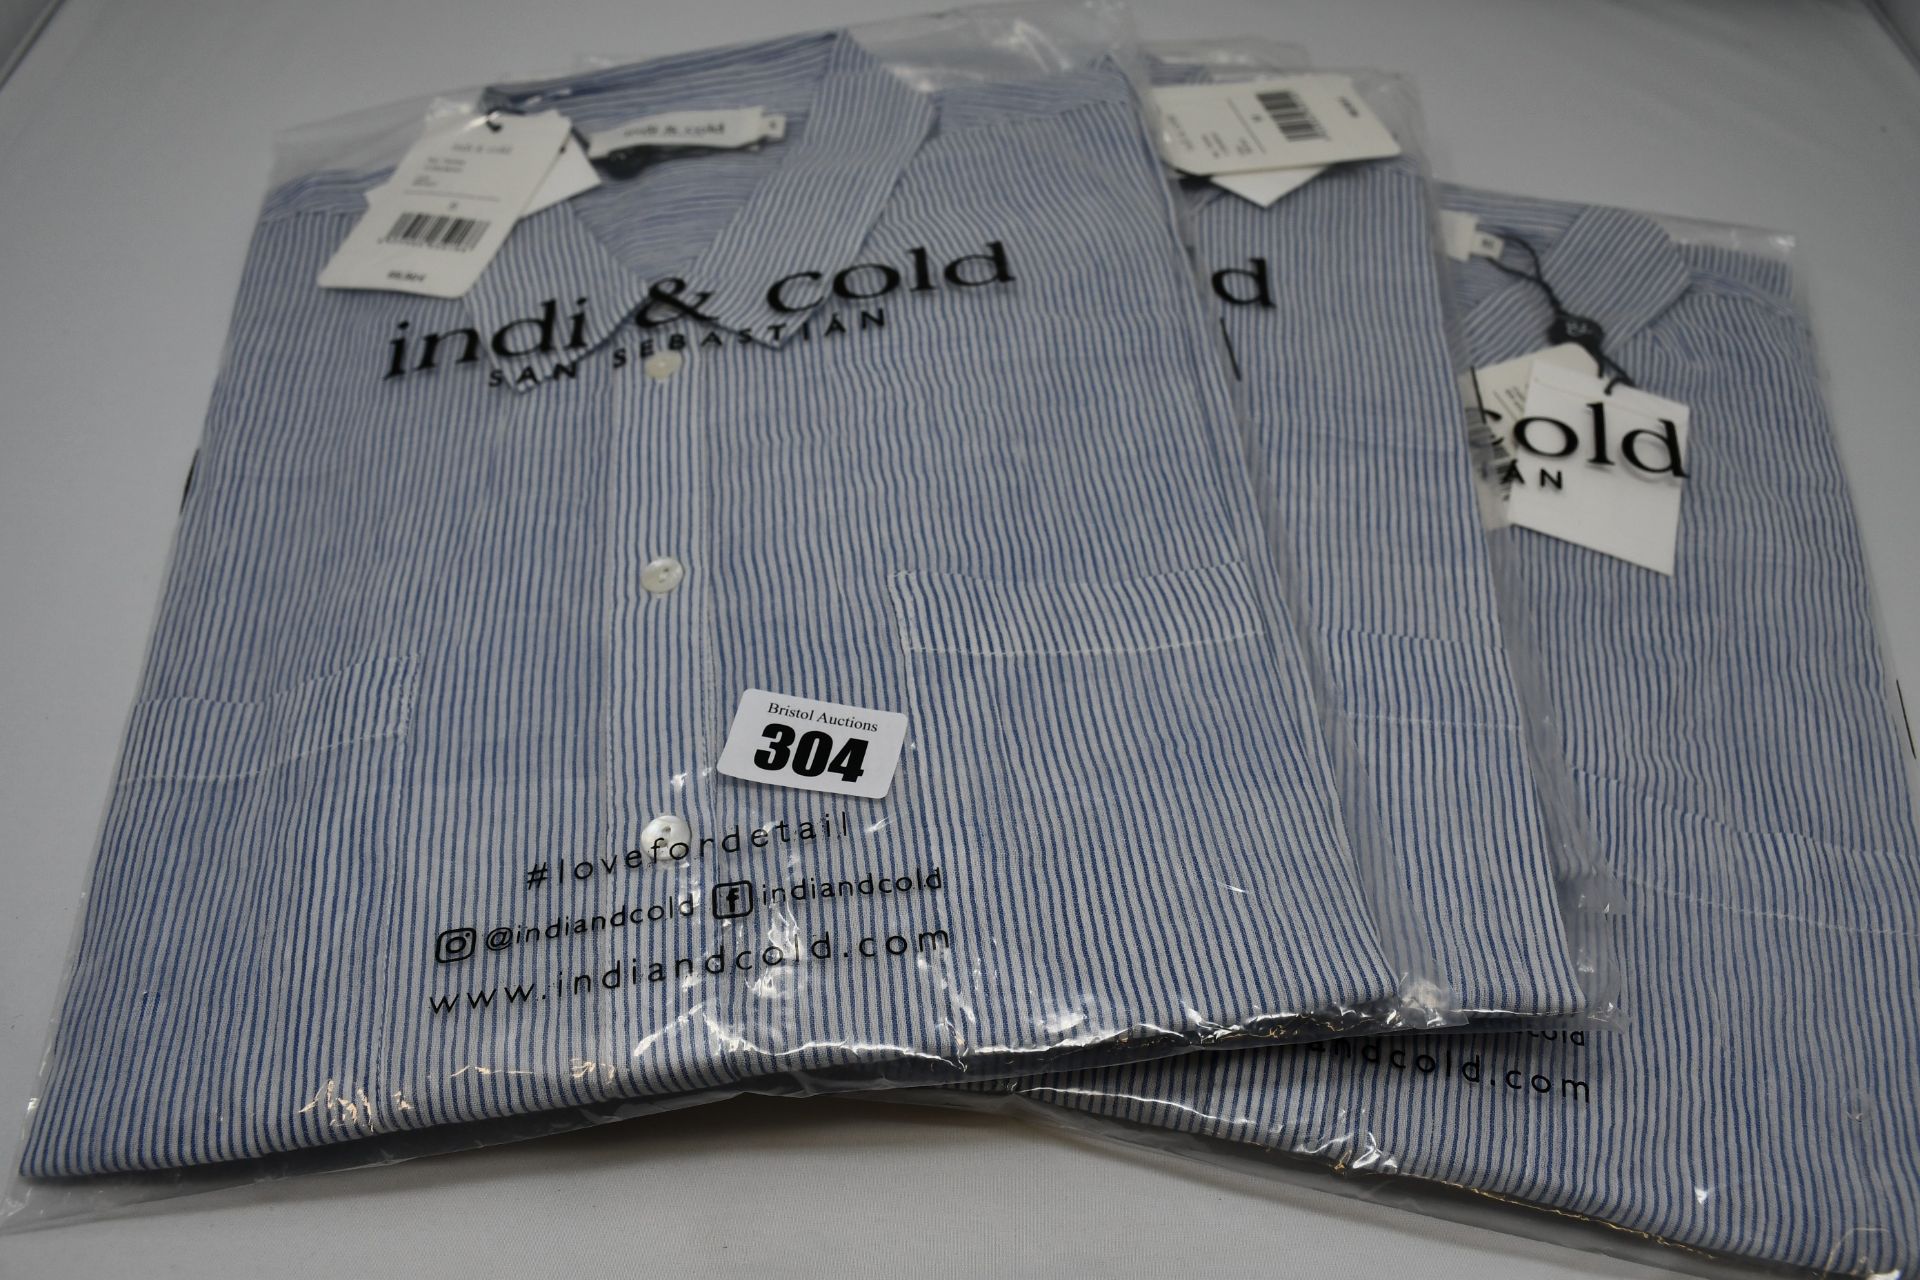 Four as new Indi & Cold Camisa blouses (S, M, L, XL).